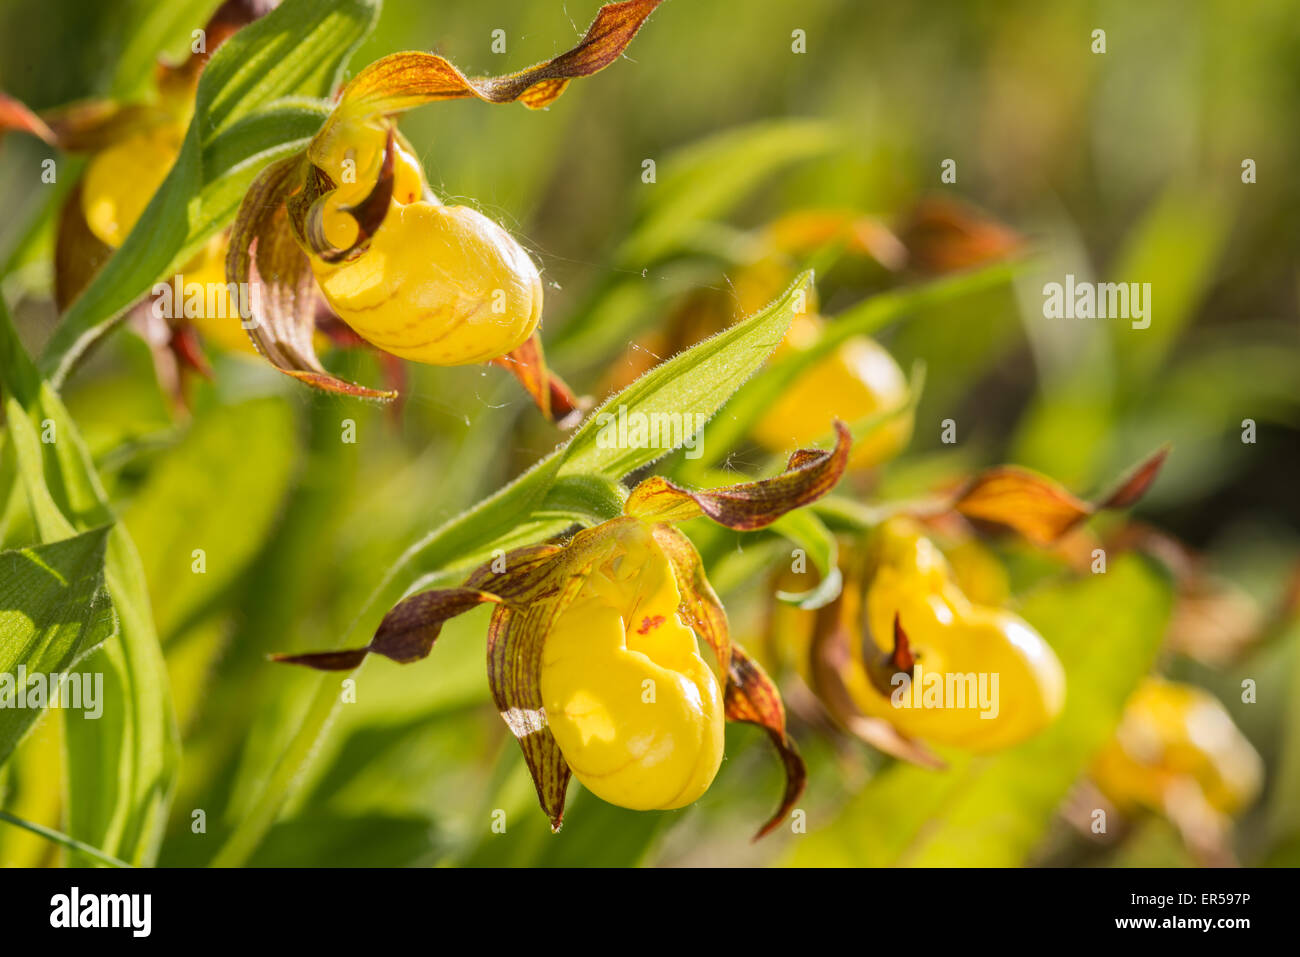 A cluster of yellow lady's-slipper orchids, Cypripedium calceolus, in the early morning sunshine, Wagner Bog Natural Area. Stock Photo